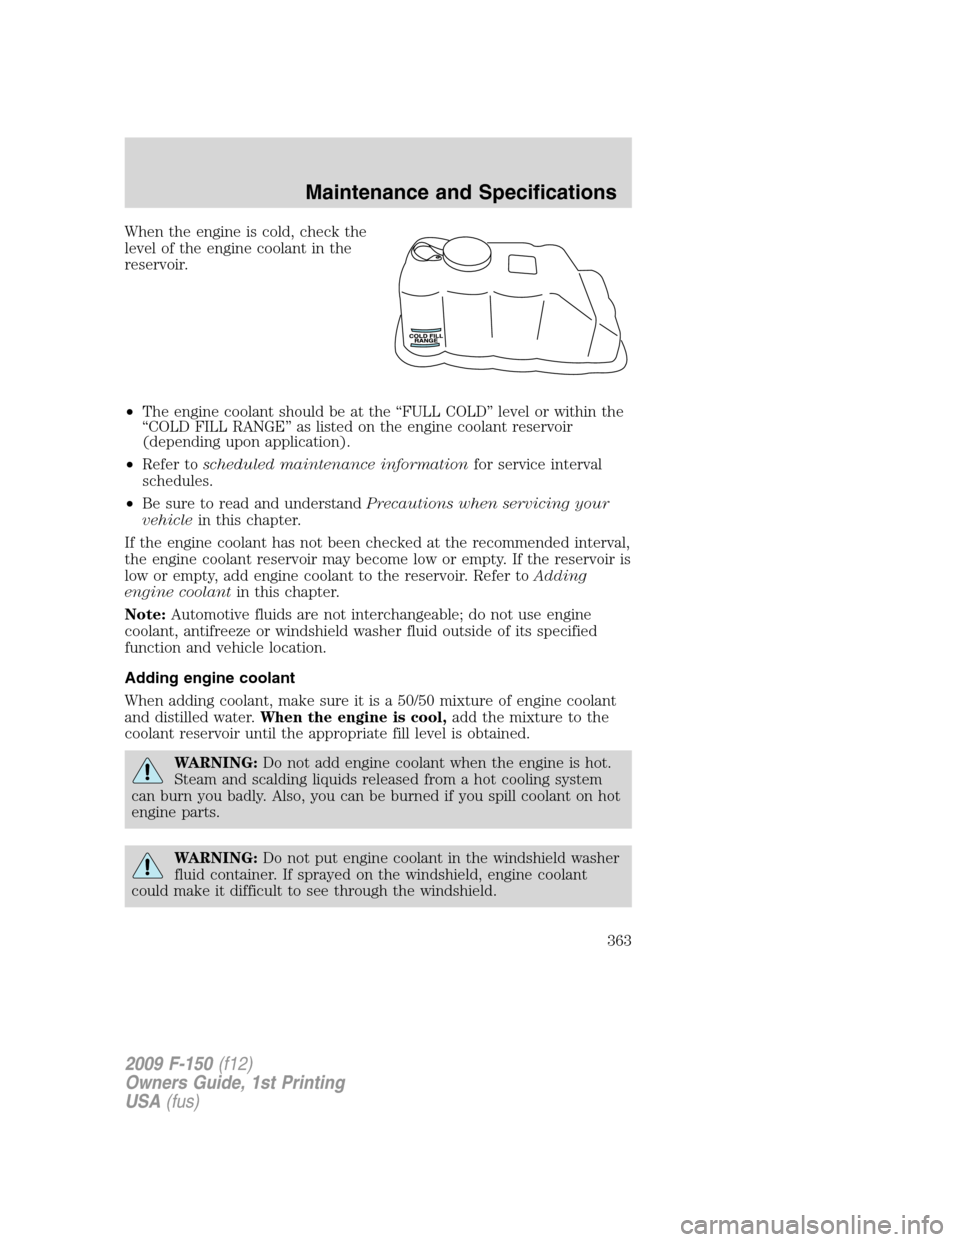 FORD F150 2009 12.G Owners Manual When the engine is cold, check the
level of the engine coolant in the
reservoir.
•The engine coolant should be at the “FULL COLD” level or within the
“COLD FILL RANGE” as listed on the engin